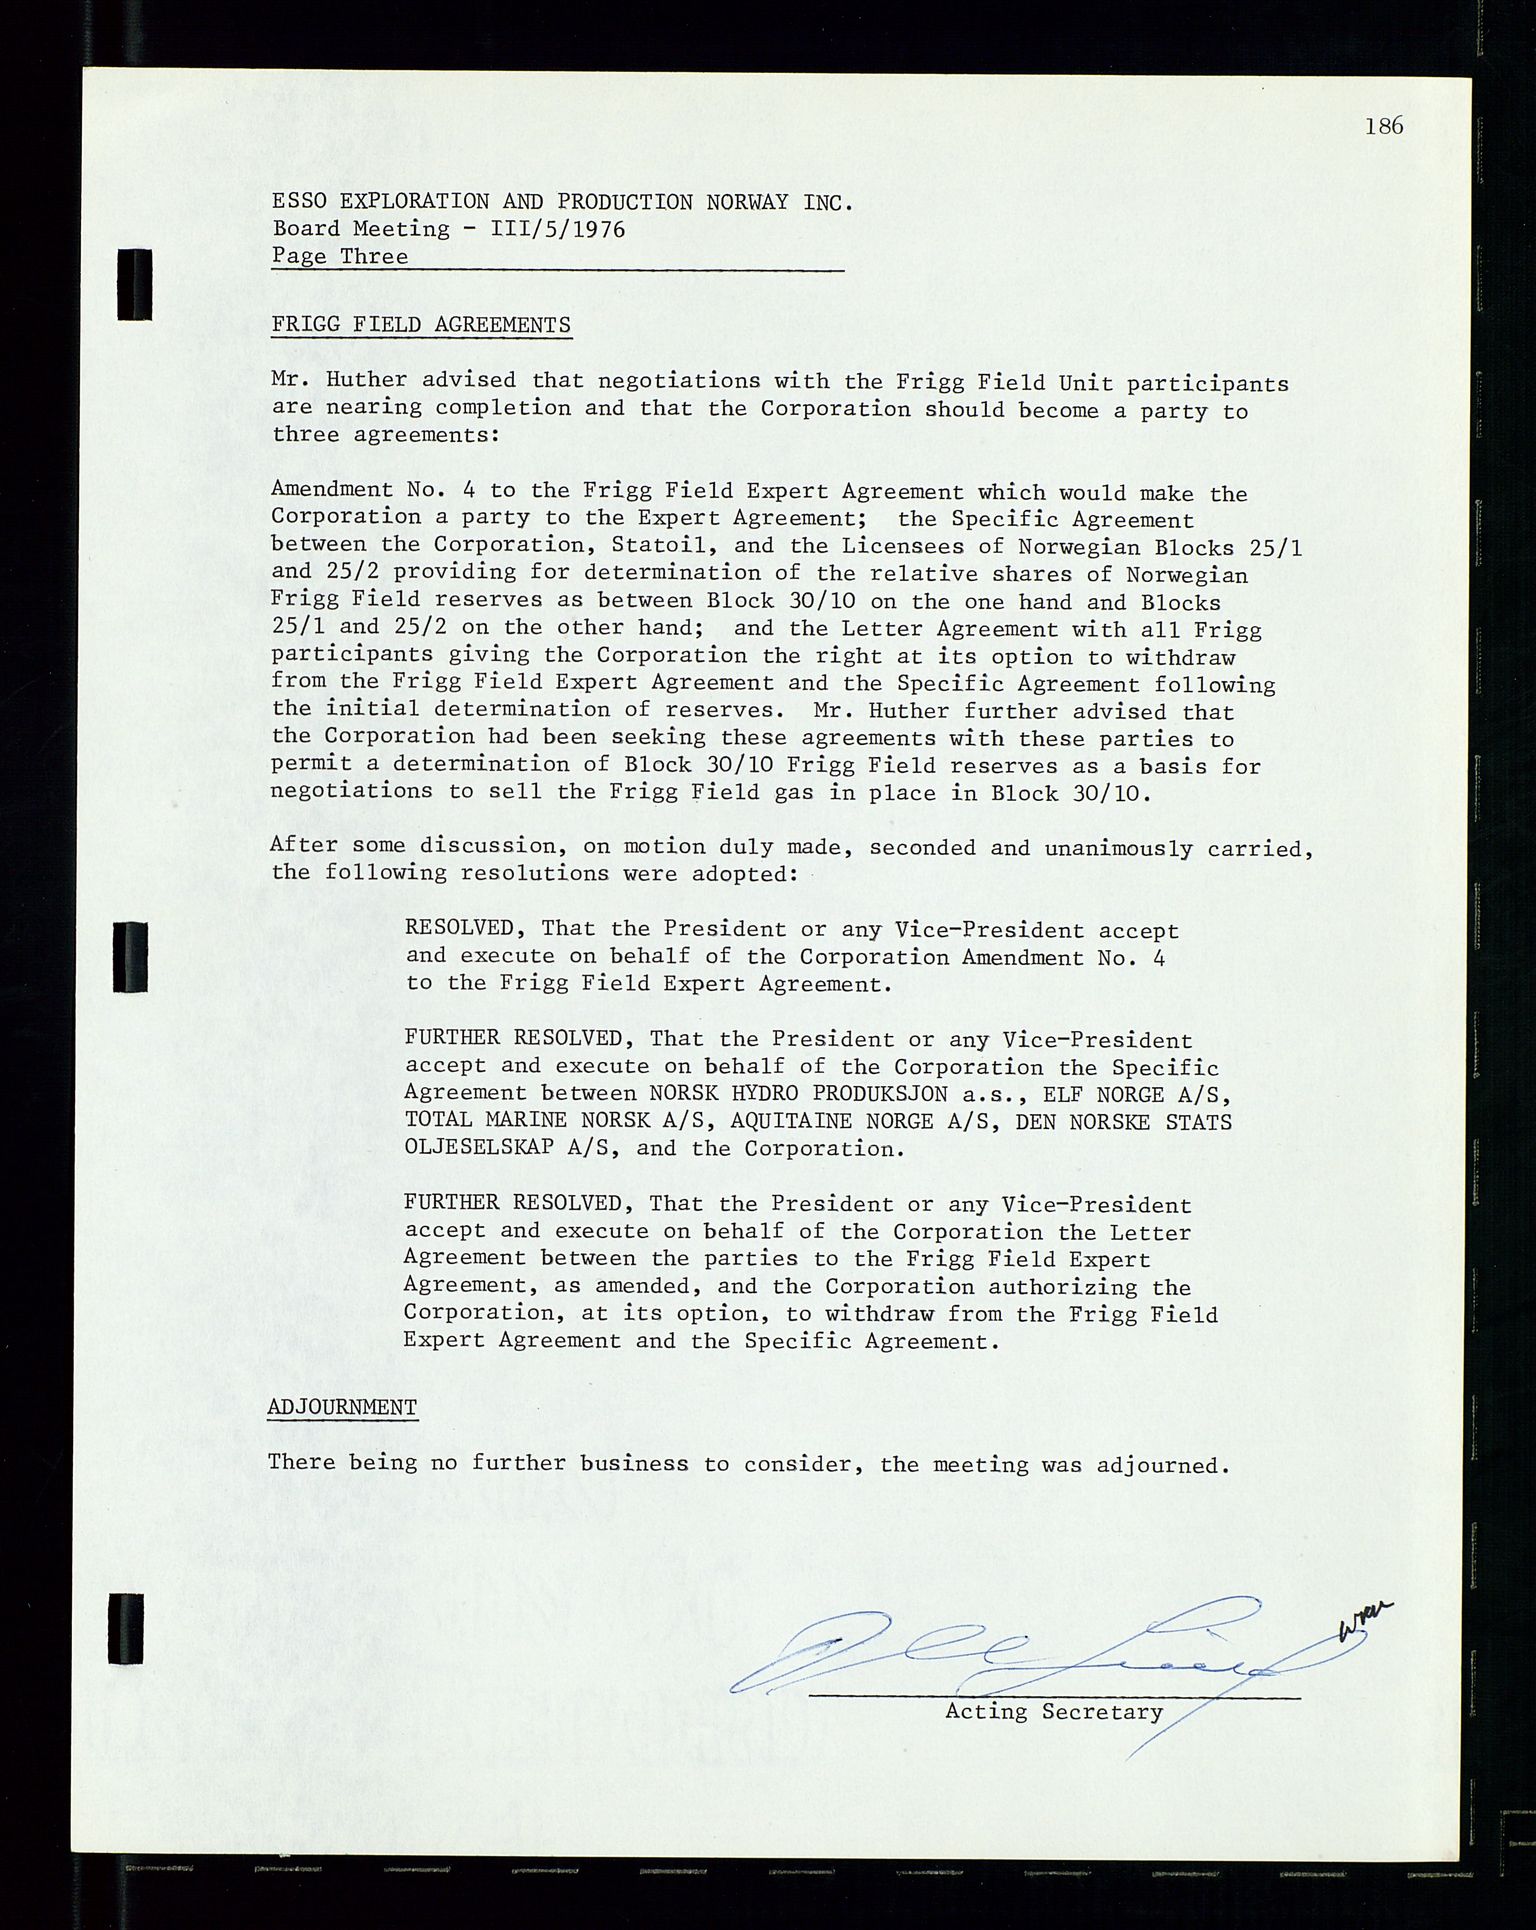 Pa 1512 - Esso Exploration and Production Norway Inc., SAST/A-101917/A/Aa/L0001/0002: Styredokumenter / Corporate records, Board meeting minutes, Agreements, Stocholder meetings, 1975-1979, s. 27